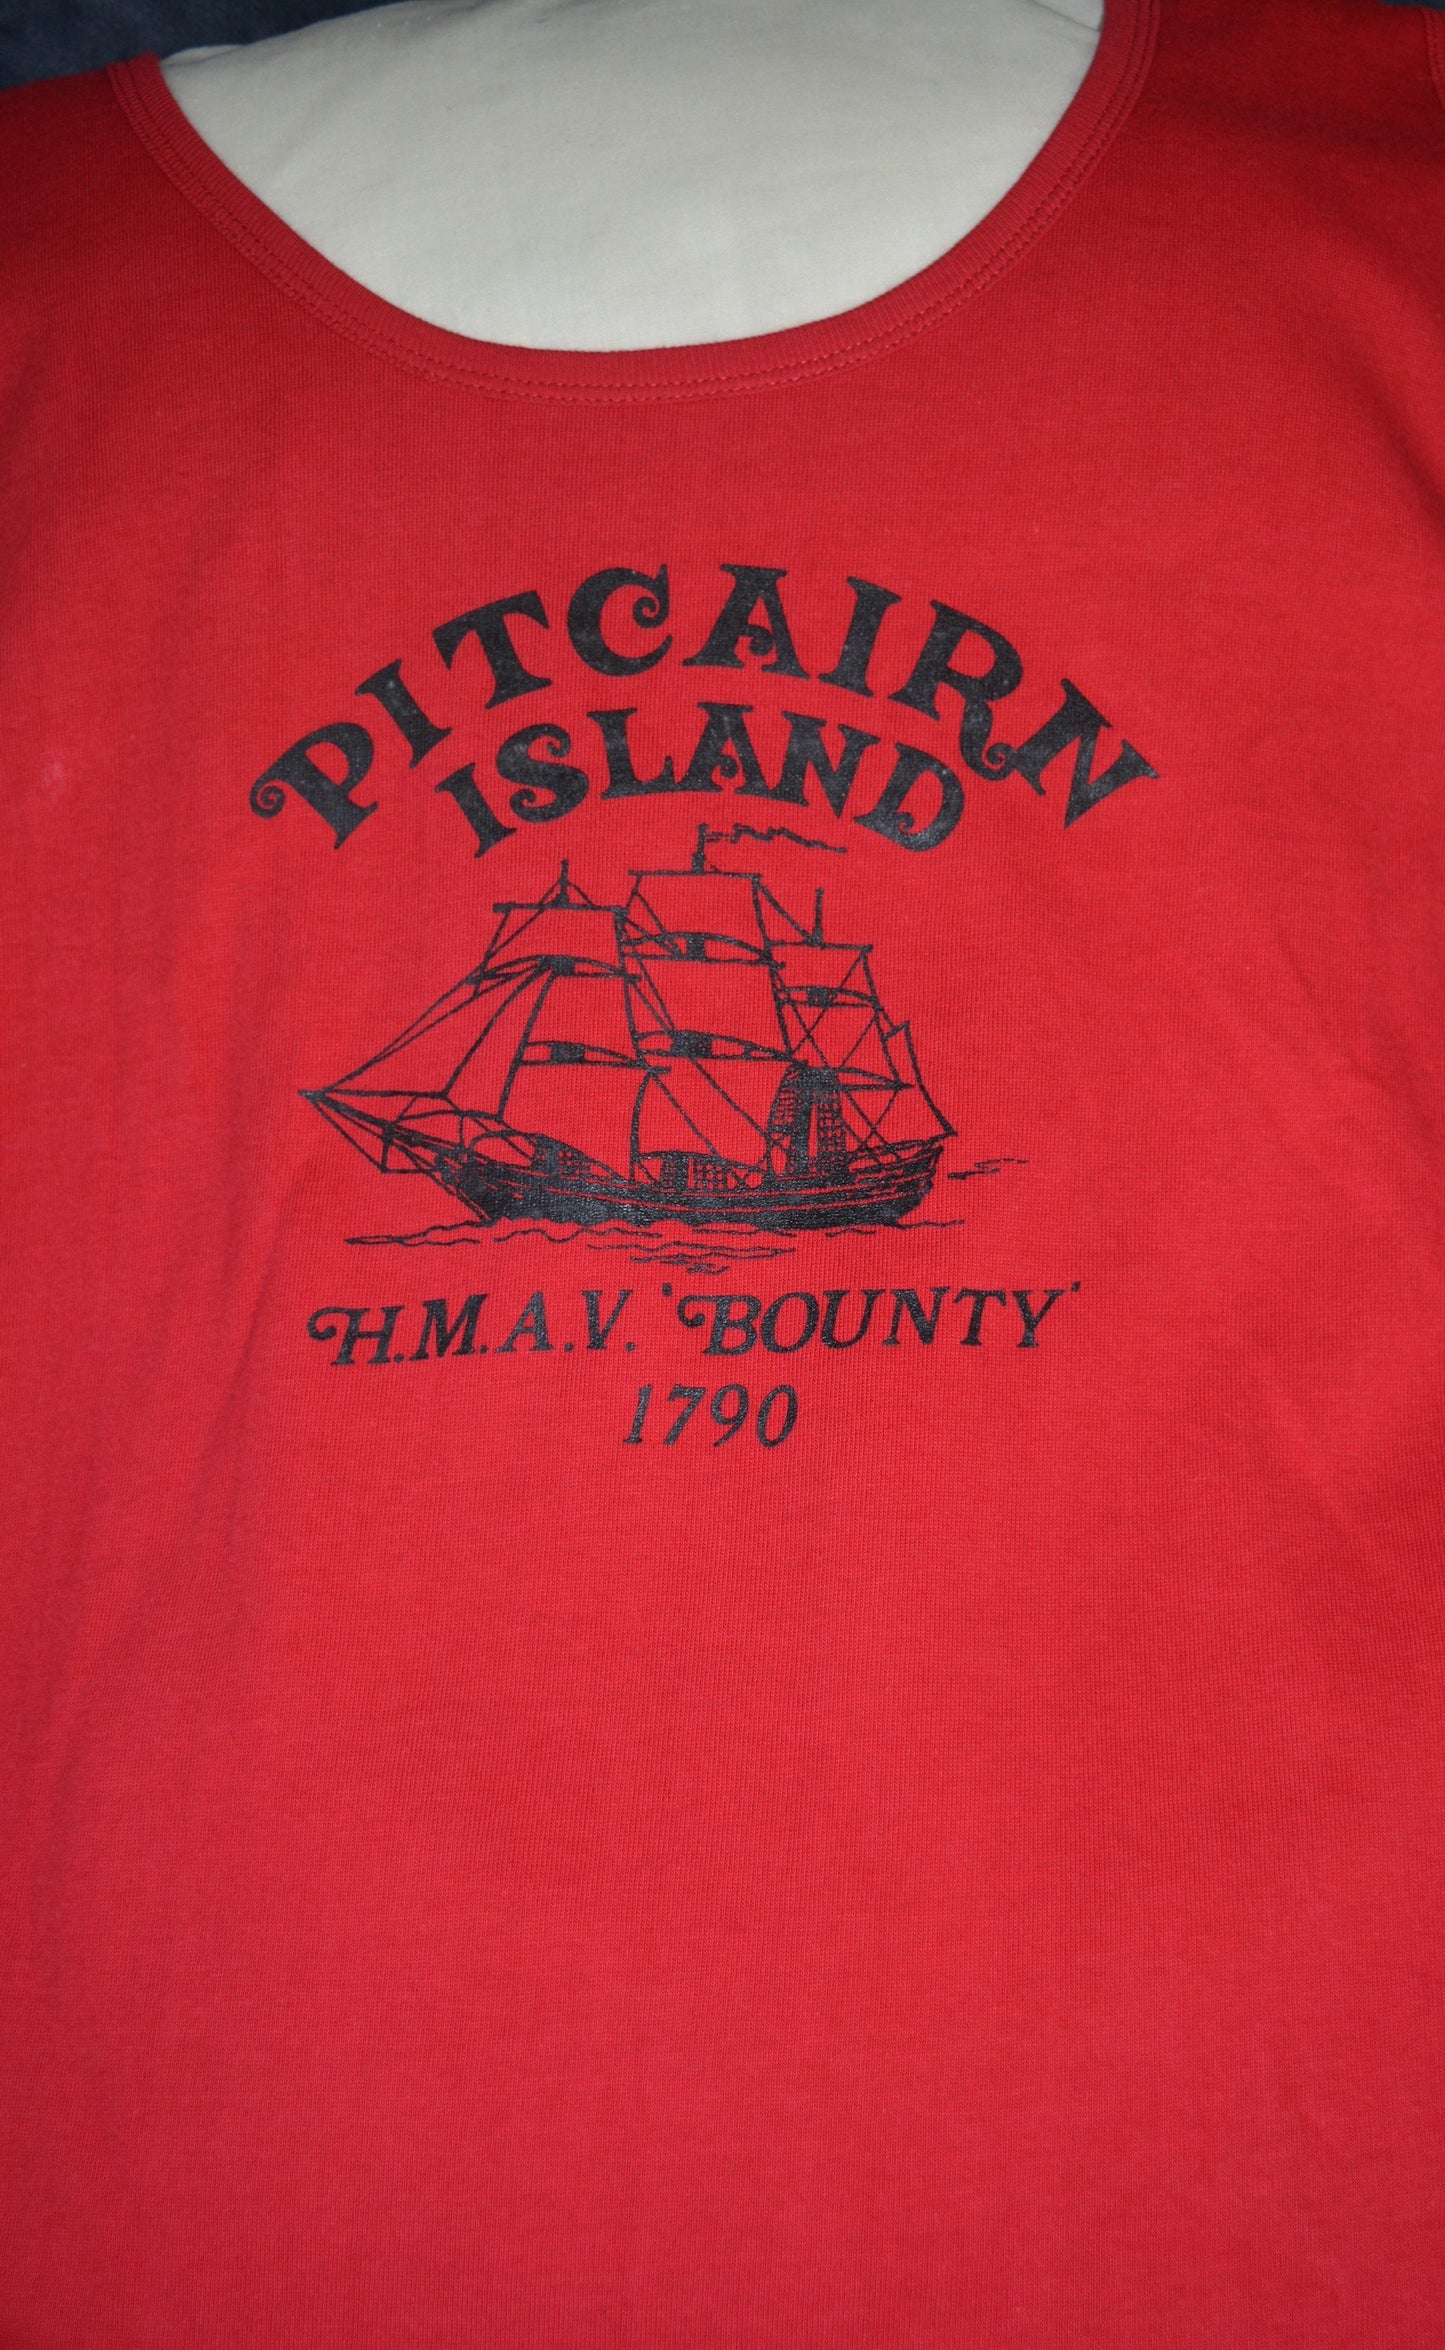 Pitcairn Island branded clothing